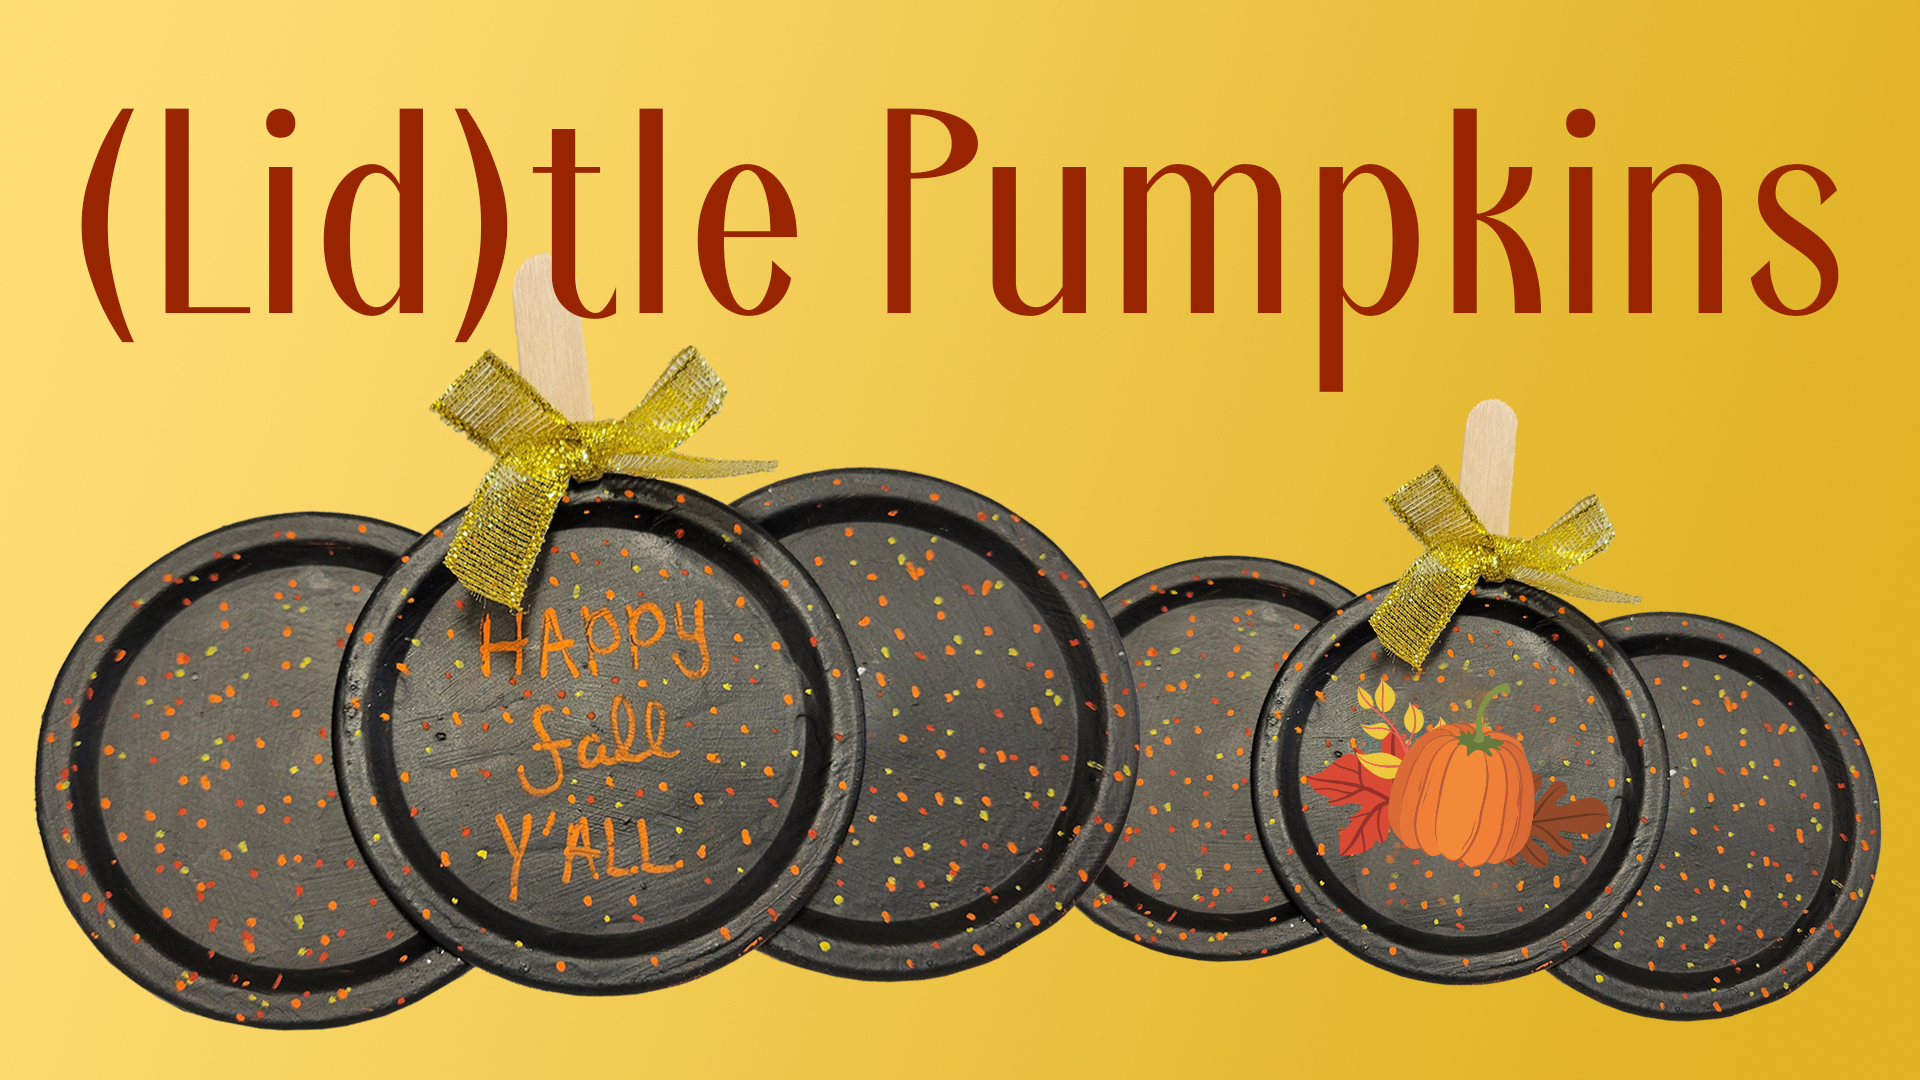 Image reads "(Lid)tle Pumpkins" against a dark yellow gradient background. Three mason jar lids glued together in the shape of a pumpkin are under the title. The left set of jar lids says "Happy Fall Y'all" and the right set of lids has a pumpkin and leaves on it. 